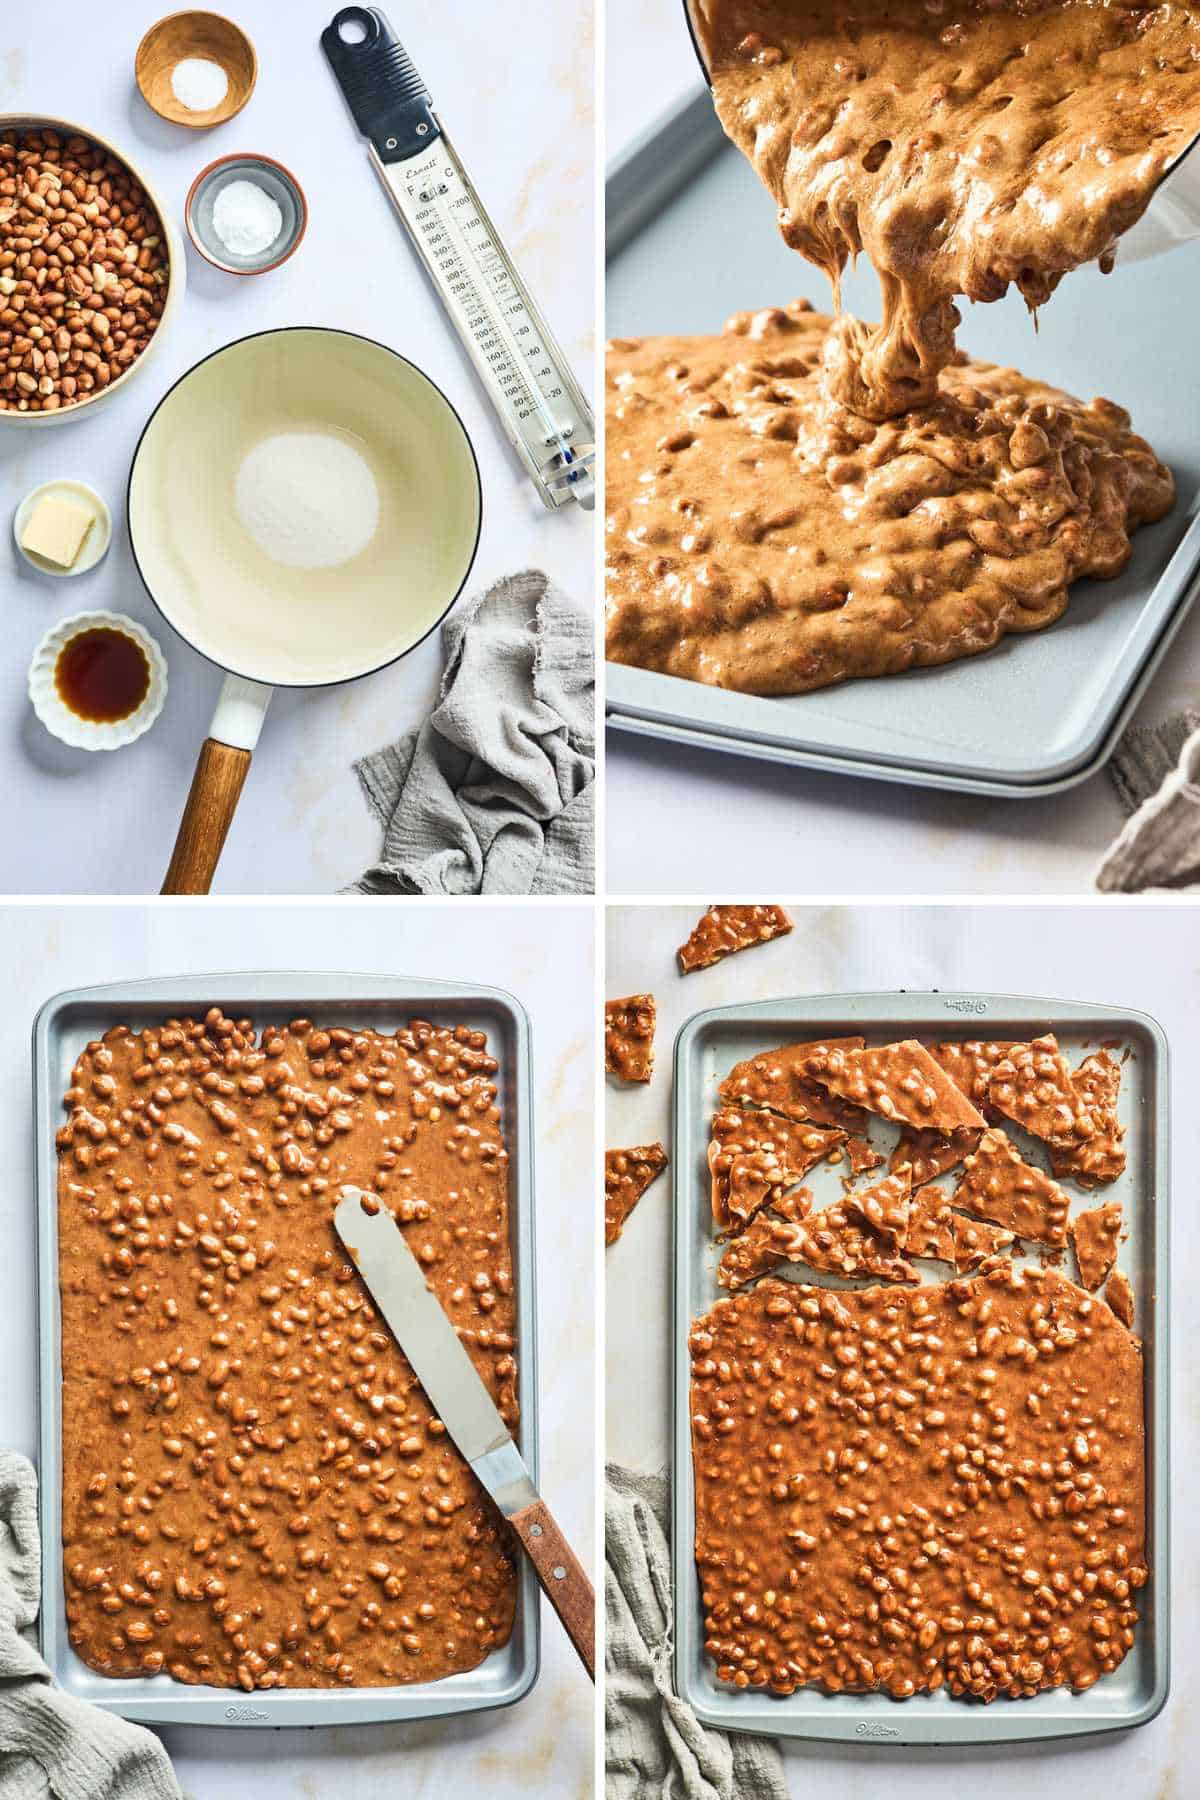 A collage showing the steps of making peanut brittle.